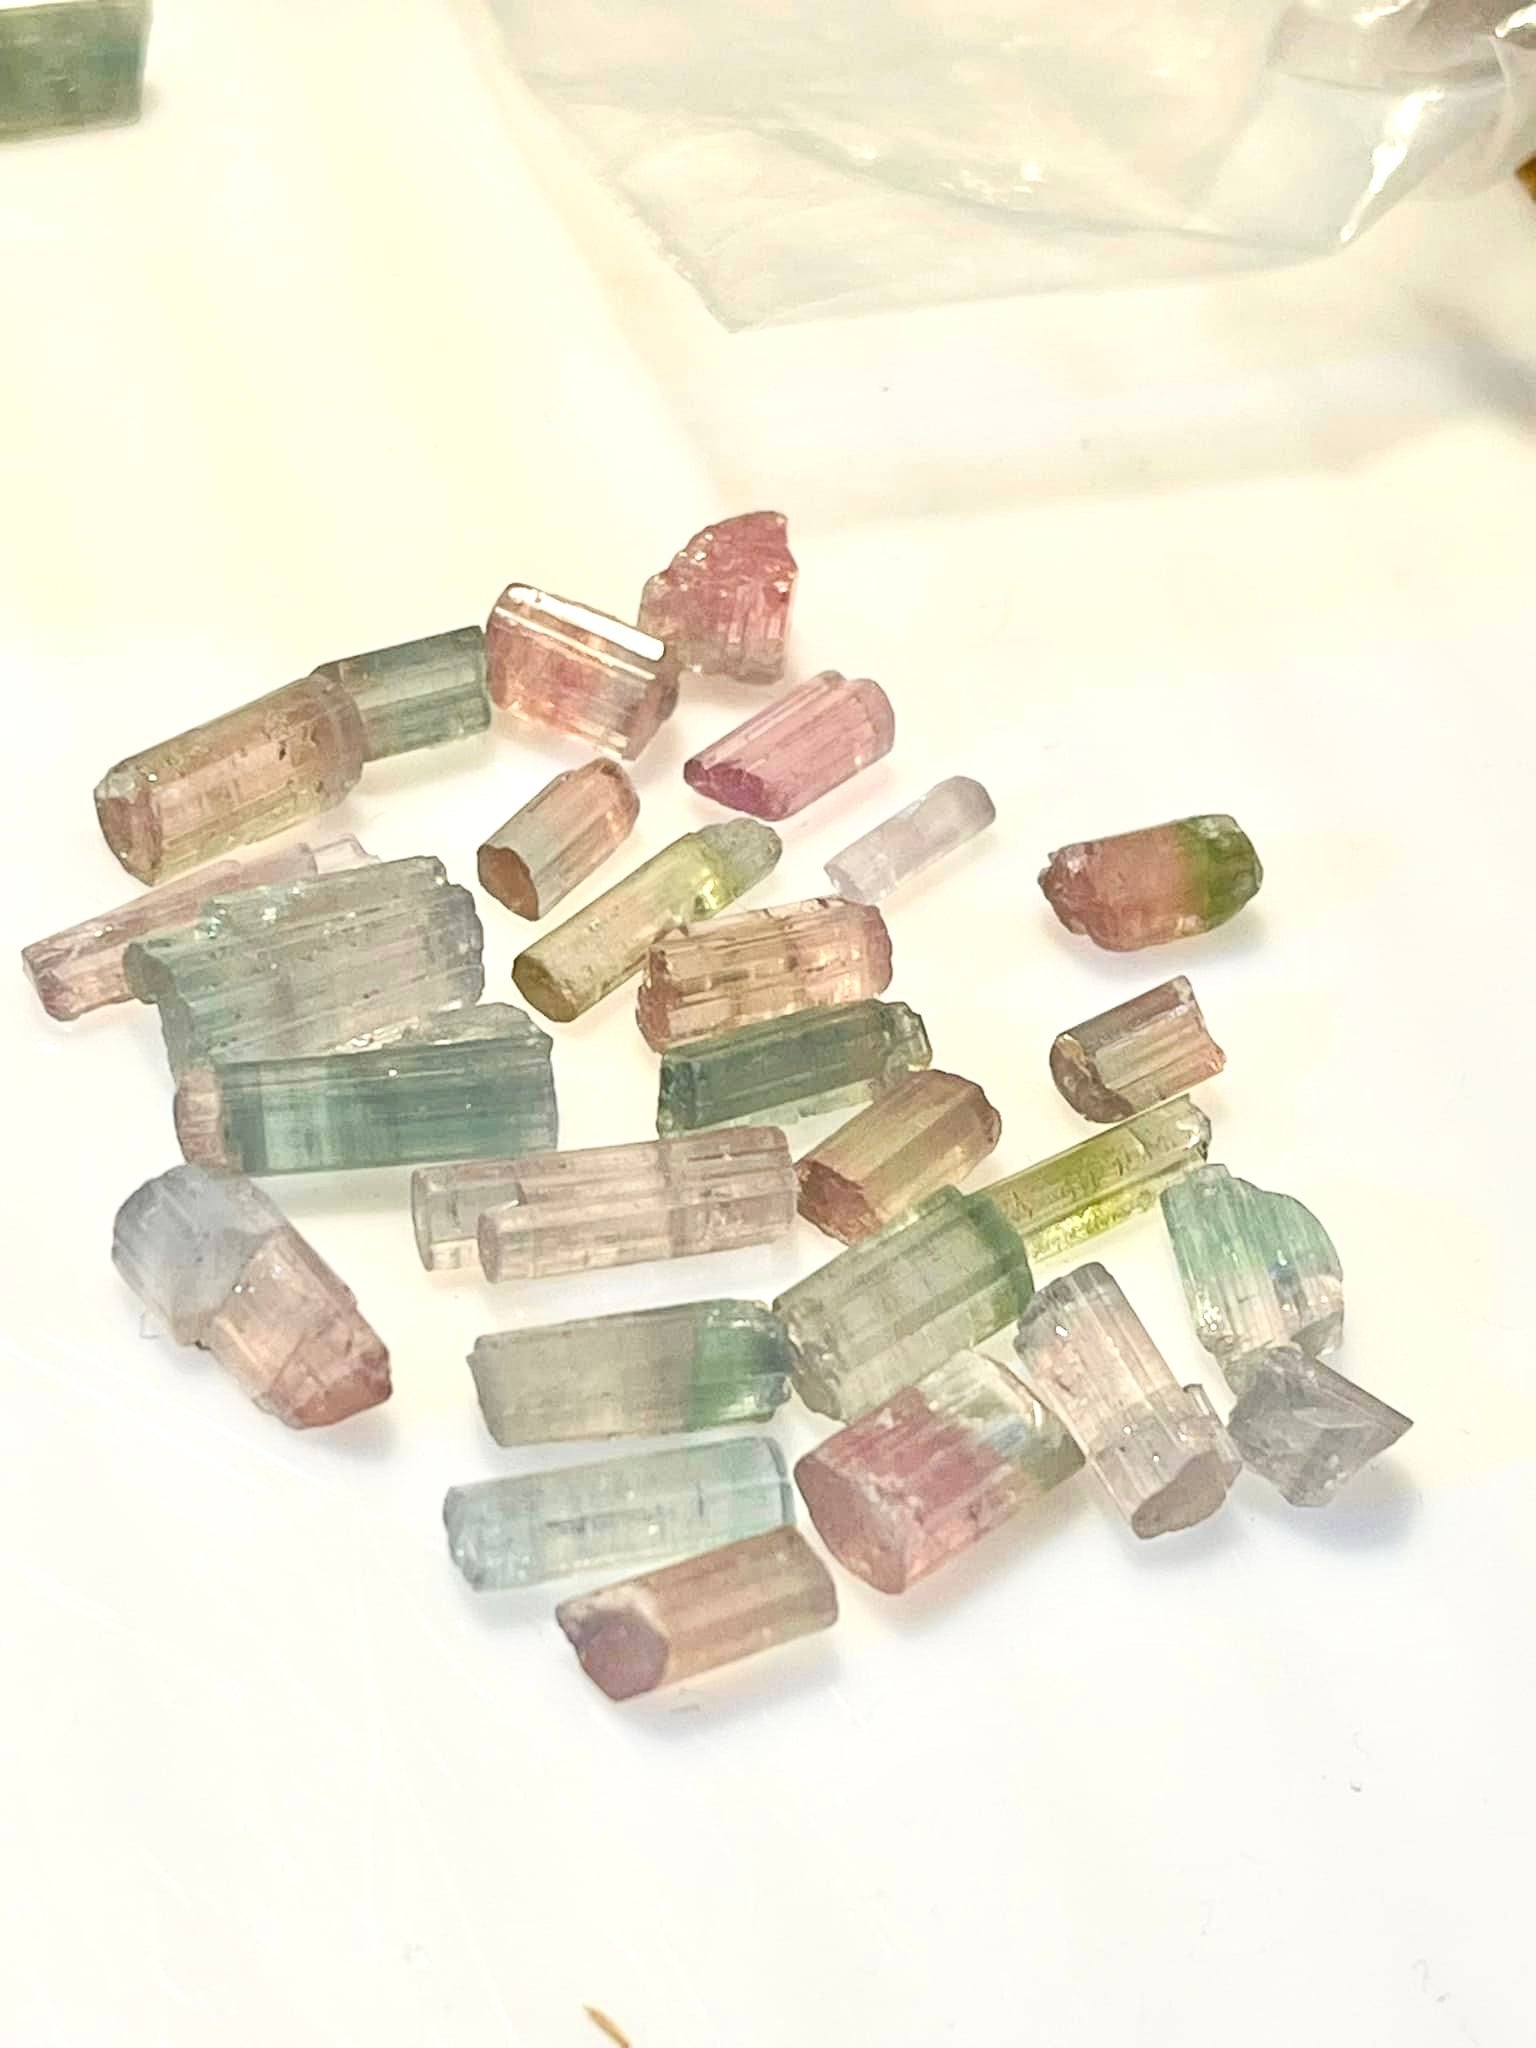 Rough Tourmaline Crystals for Collection